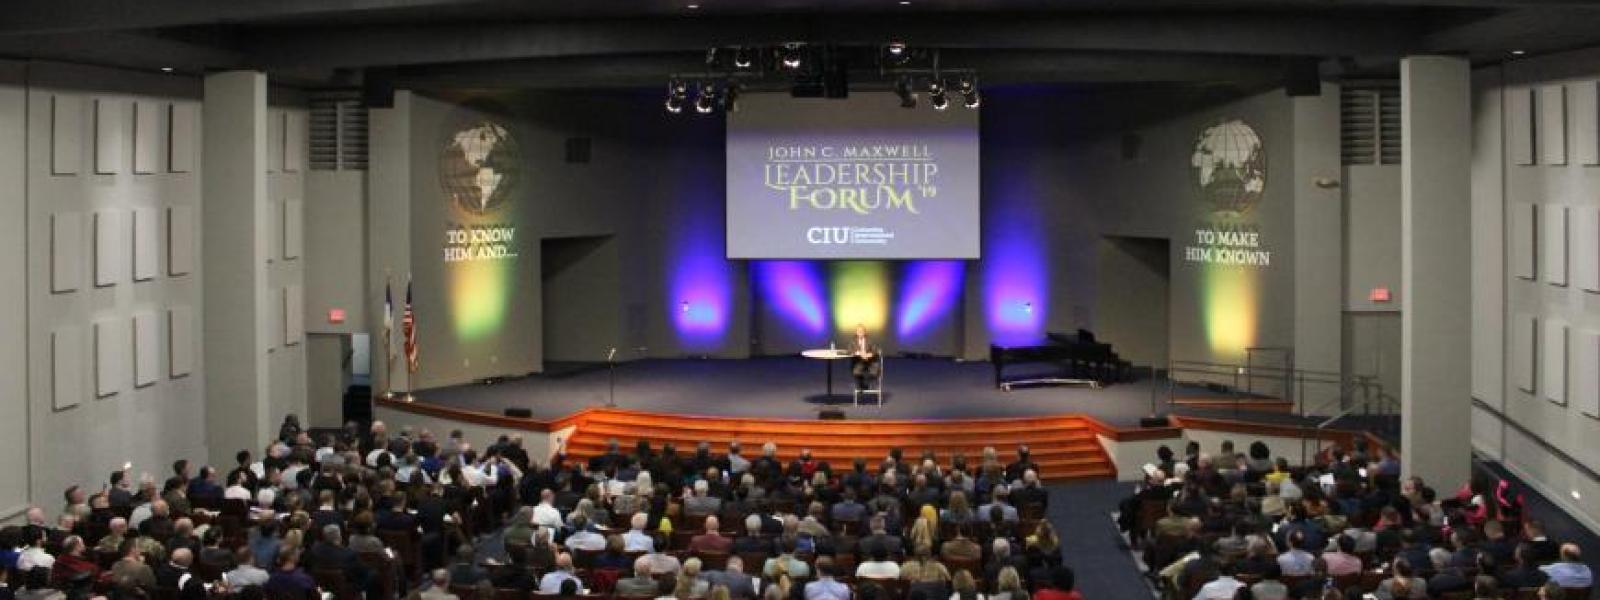 Community members and CIU students gather for the John Maxwell Leadership Forum